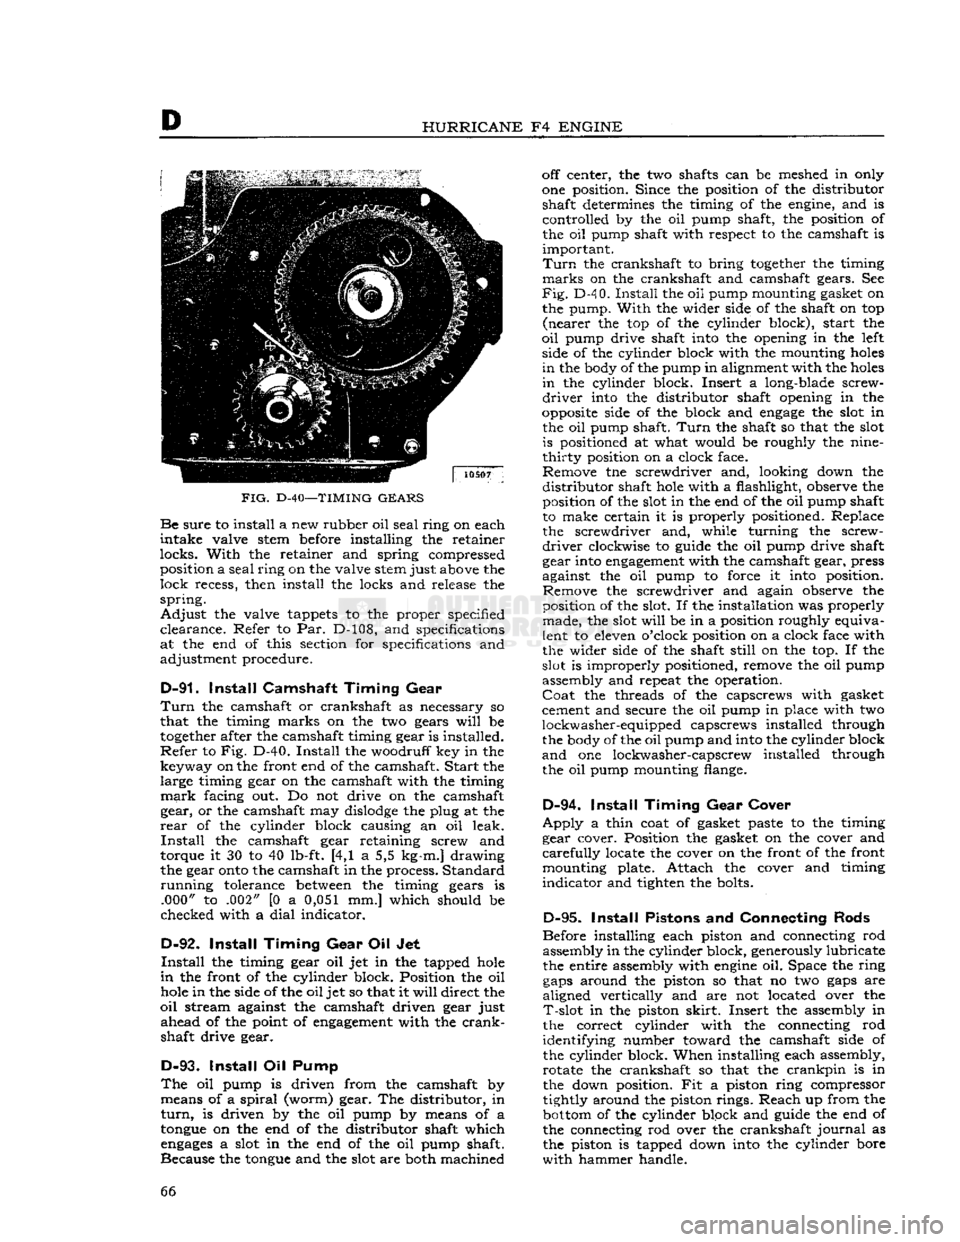 JEEP CJ 1953 Repair Manual 
D 

HURRICANE
 F4
 ENGINE 

FIG.
 D-40—TIMING
 GEARS  Be
 sure
 to install a new rubber oil
 seal
 ring on each 

intake
 valve stem before installing the retainer 

locks.
 With
 the retainer and 